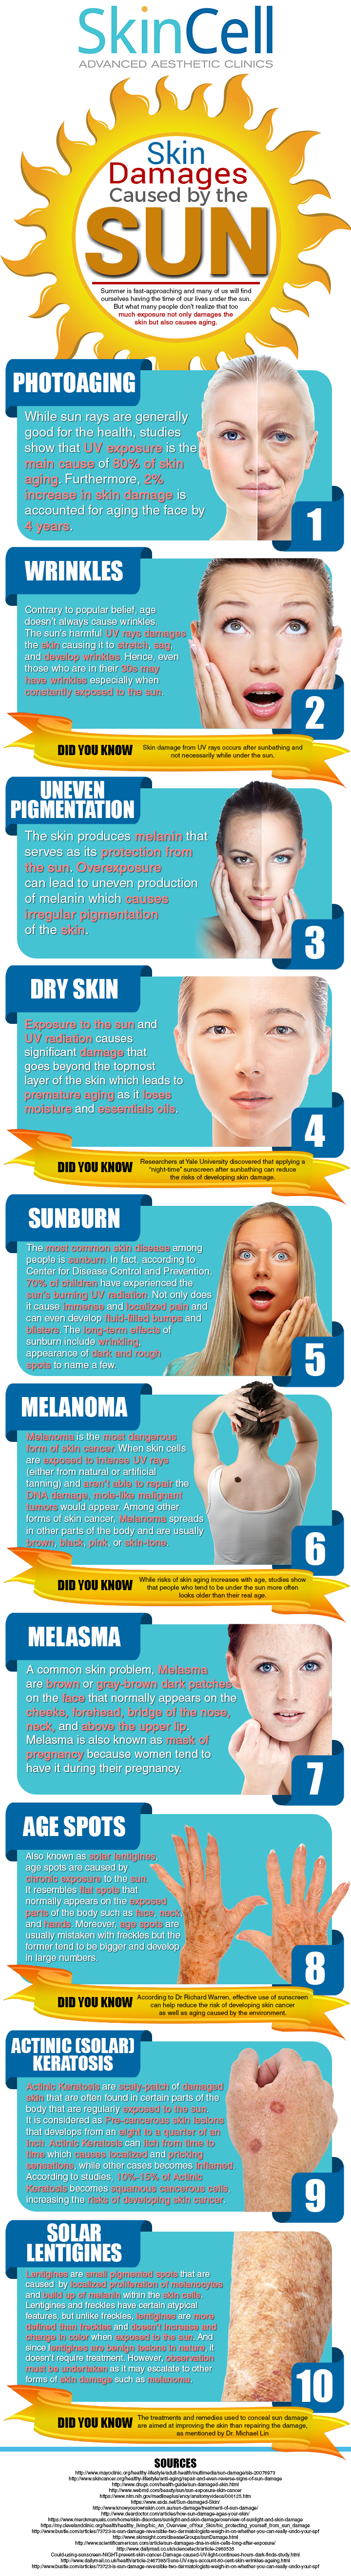 skin damages caused by the sun infographic